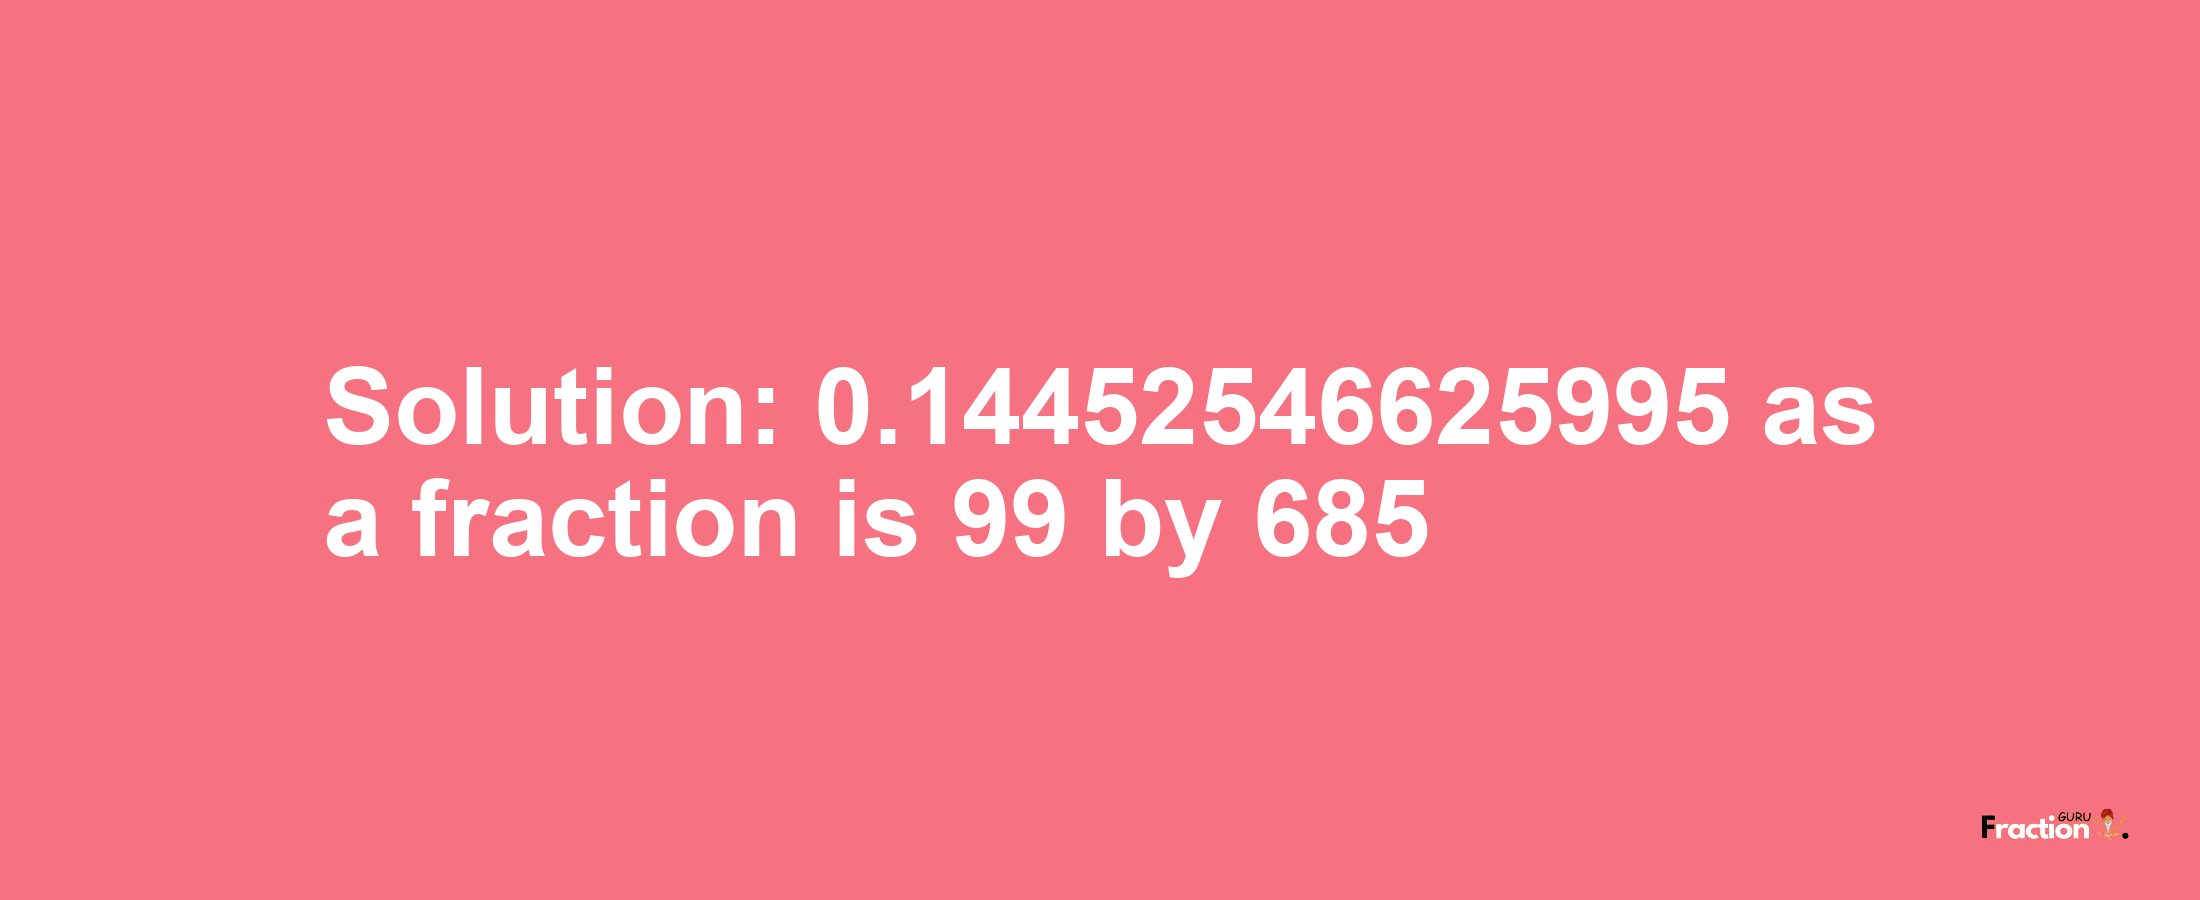 Solution:0.14452546625995 as a fraction is 99/685